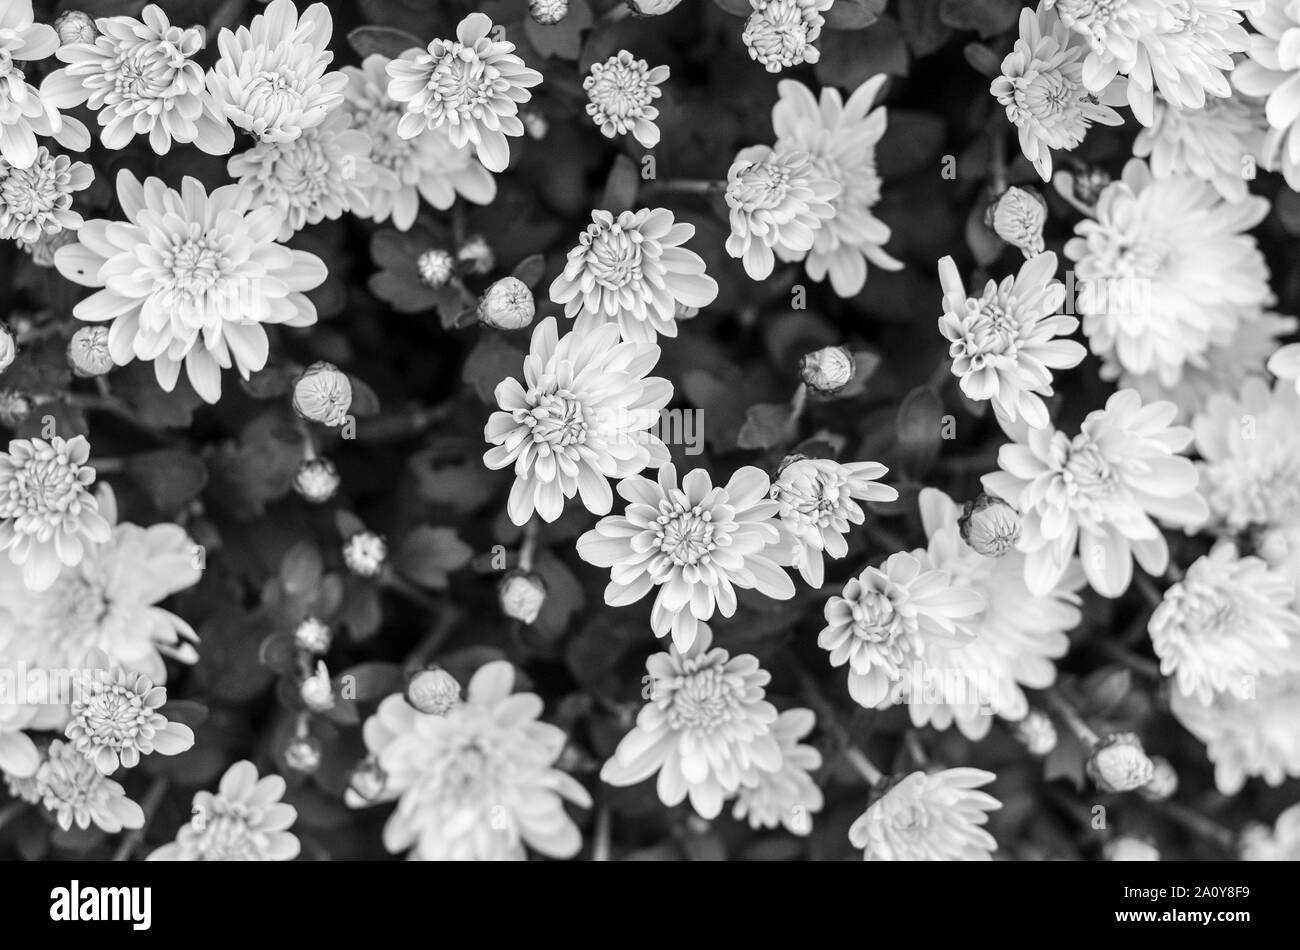 Floral black and white pattern Stock Photo - Alamy